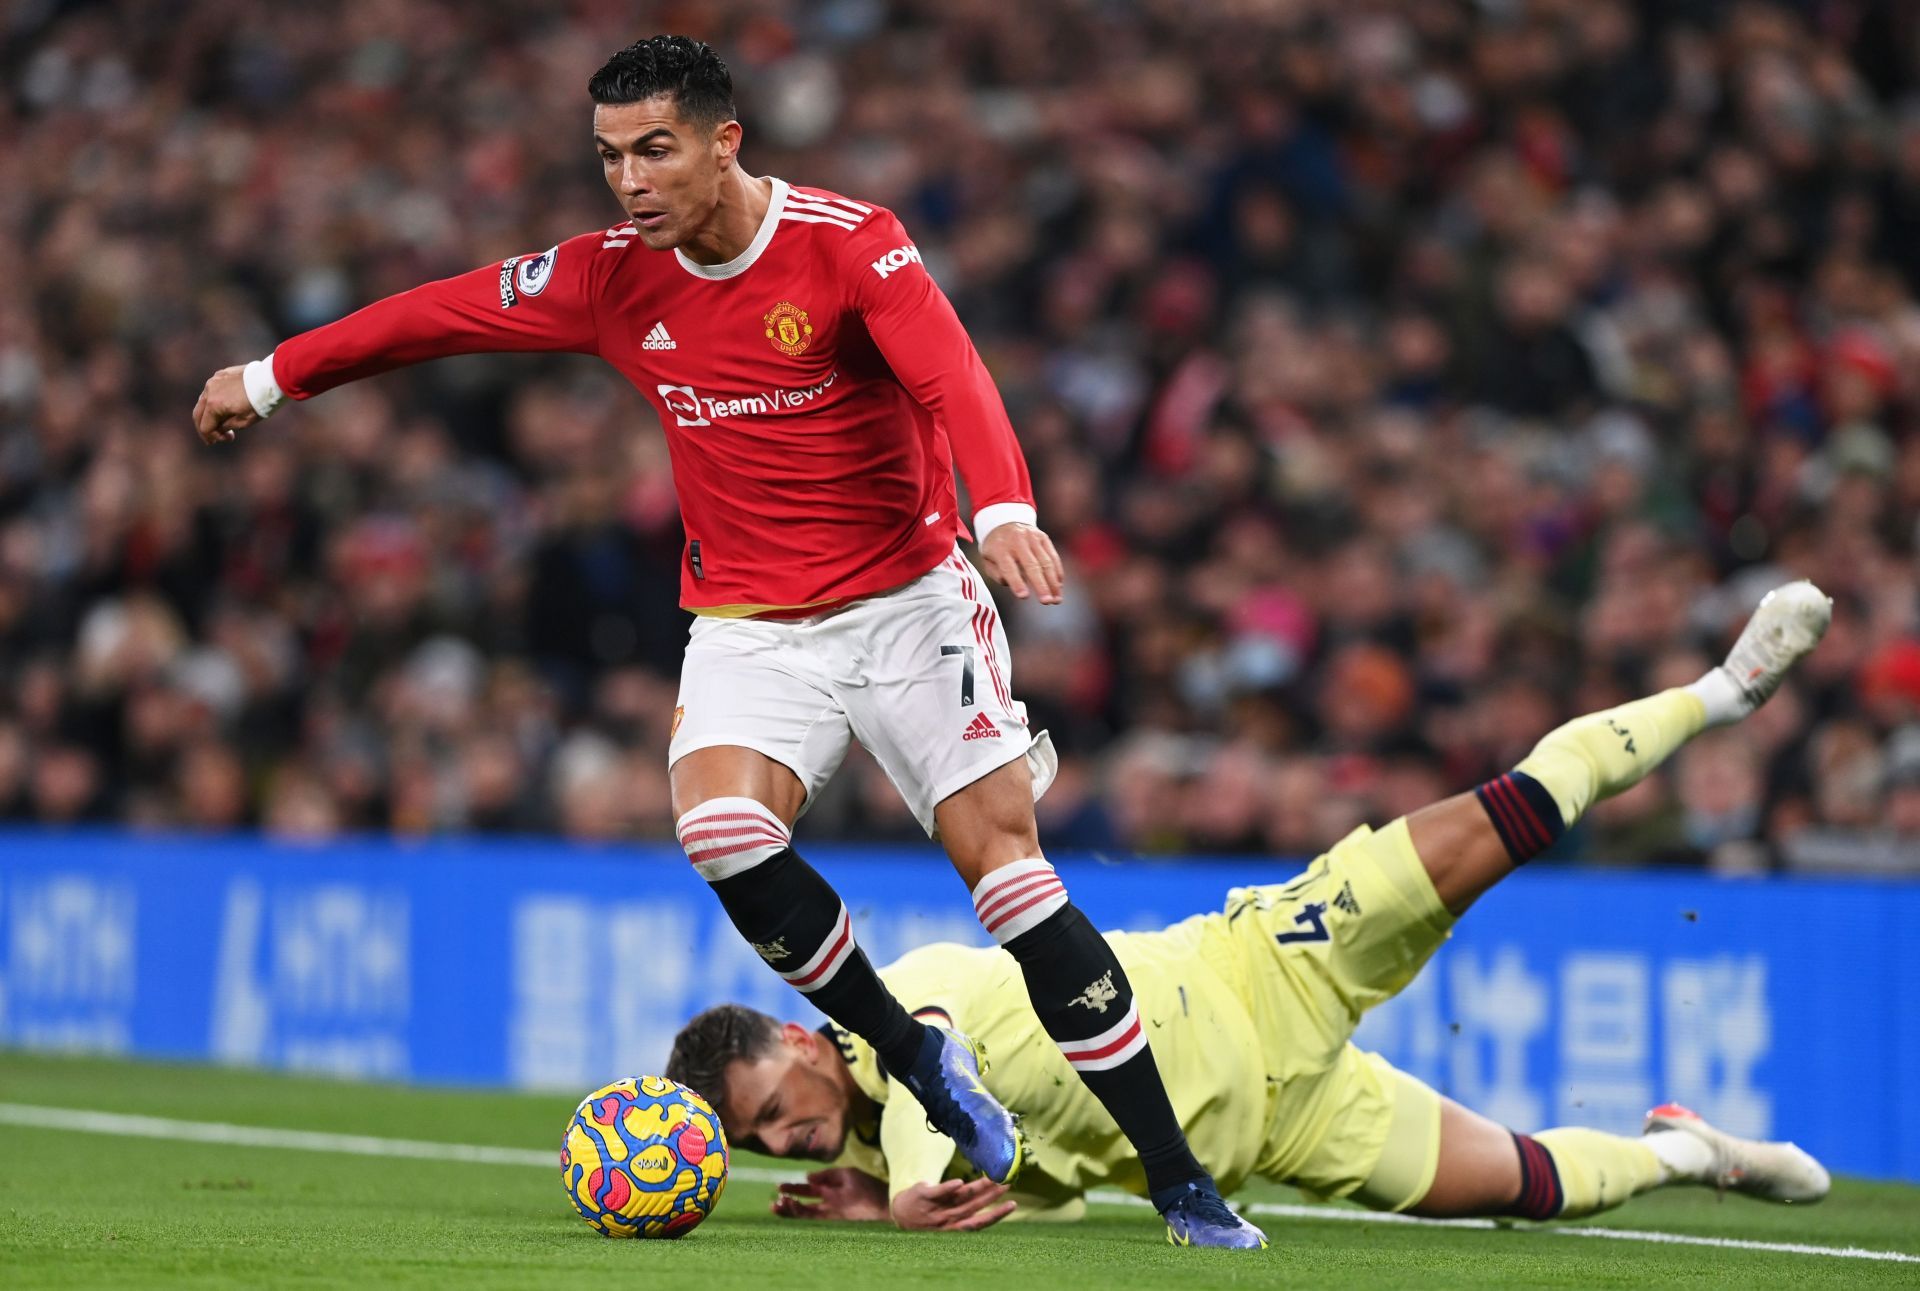 Cristiano Ronaldo in action for Manchester United in the Premier League.